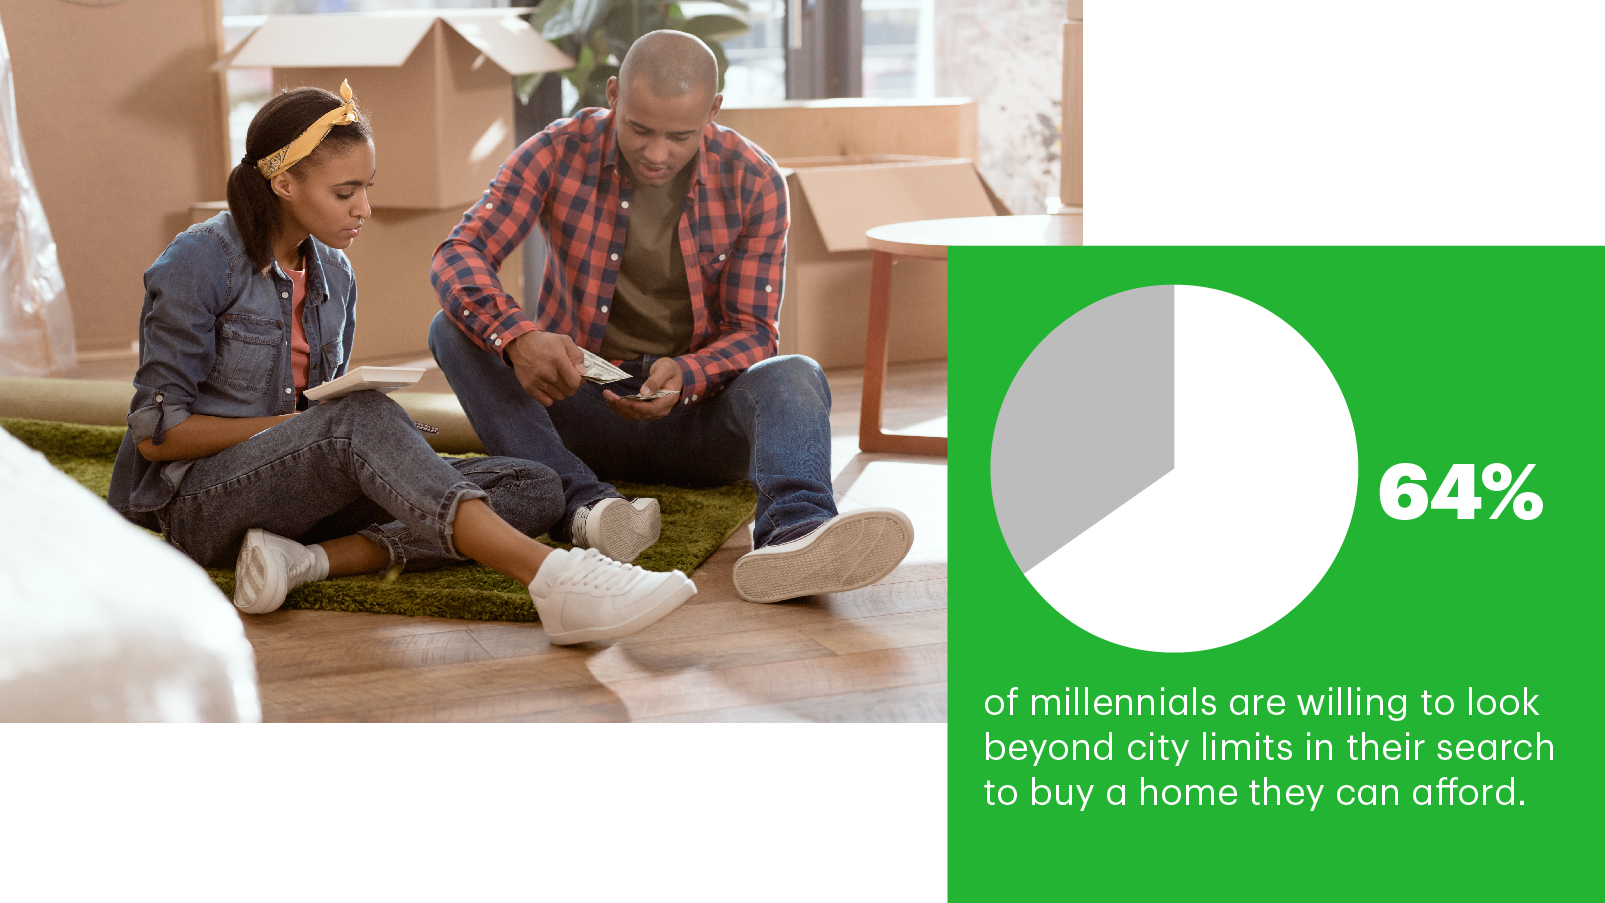 64 per cent of millennials are willing to search beyond city limits in their search to a buy a home they can afford.